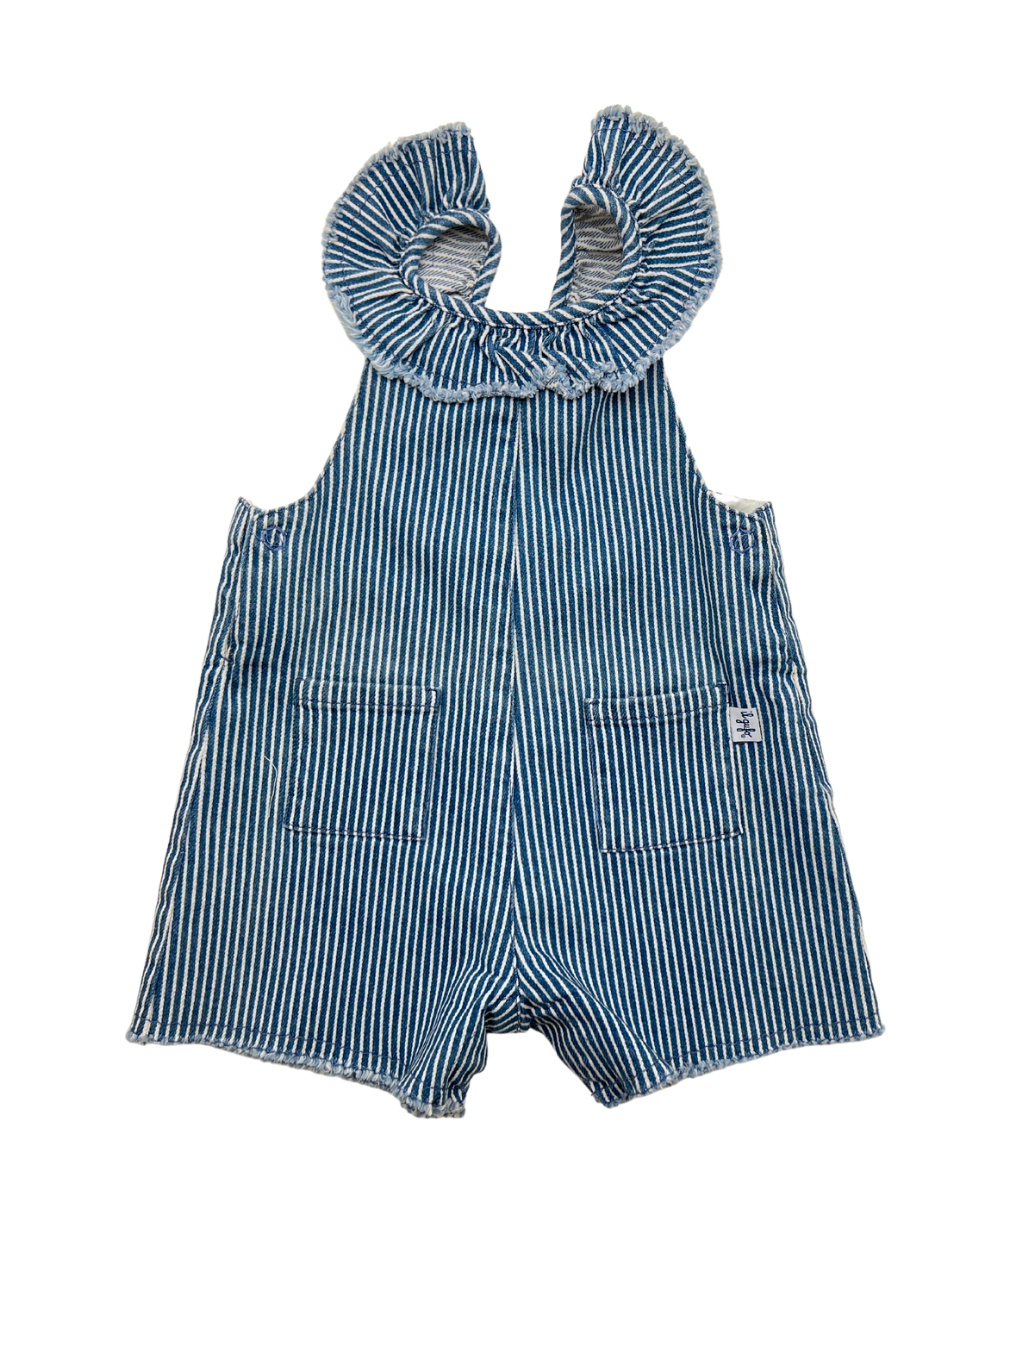 IL GUFO - Striped dungarees - 6 months